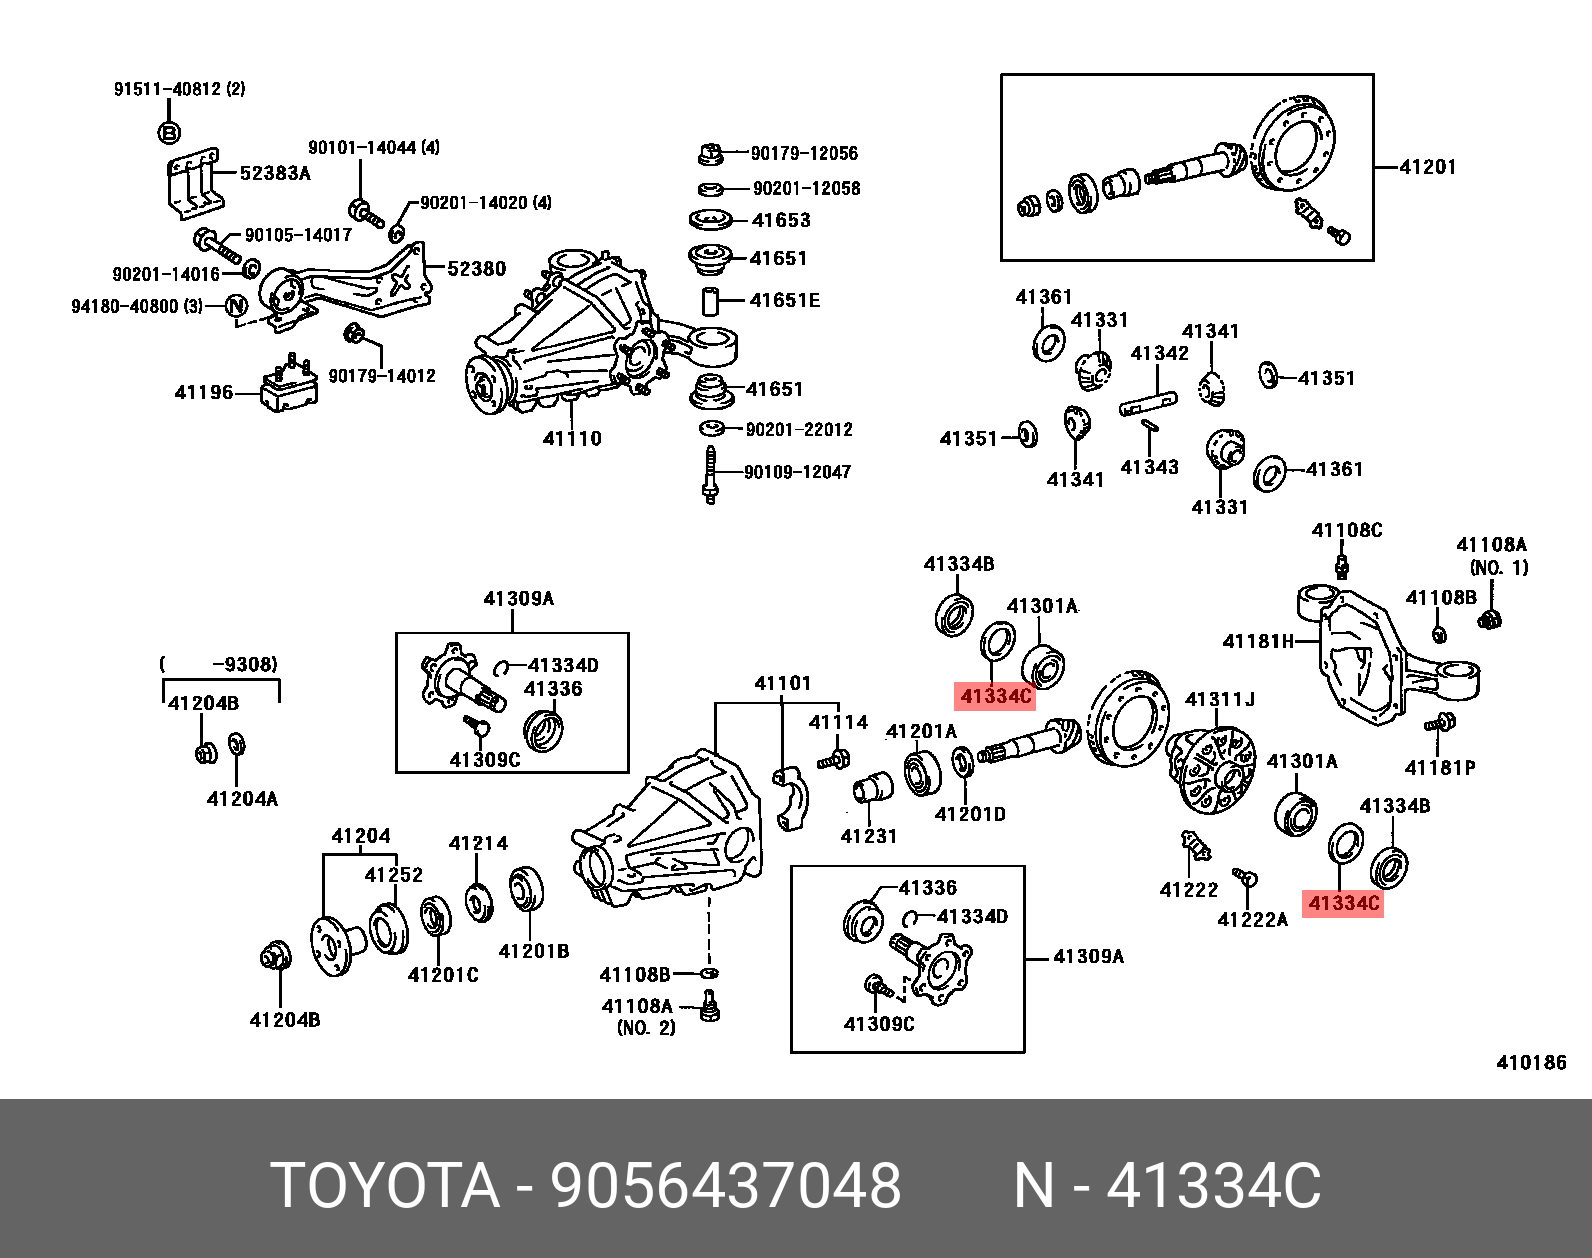 COROLLA AXIO/ FIELDER 201204 -, WASHER, PLATE (FOR REAR DIFFERENTIAL SIDE GEAR SHAFT)